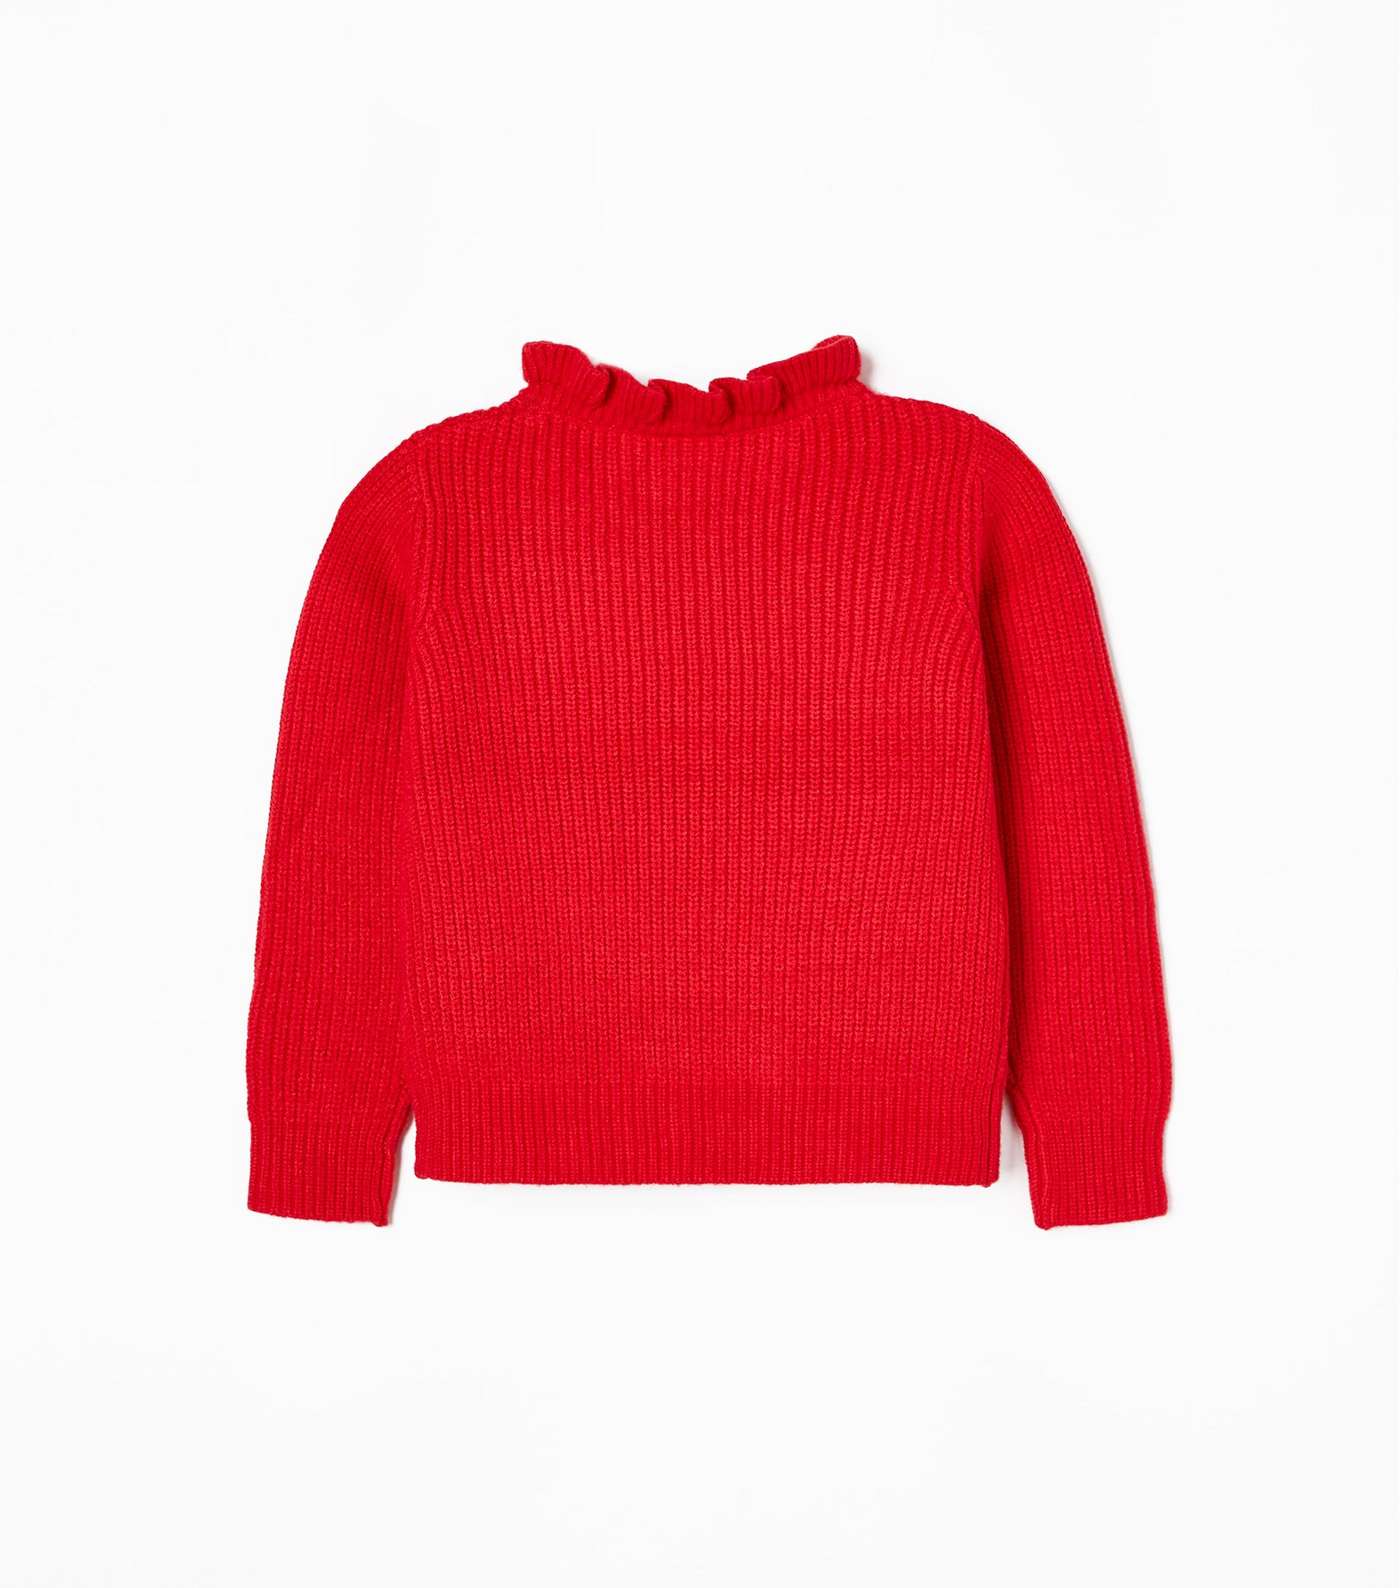 Zippy Red Chunky Knit High Neck Jumper Image 2